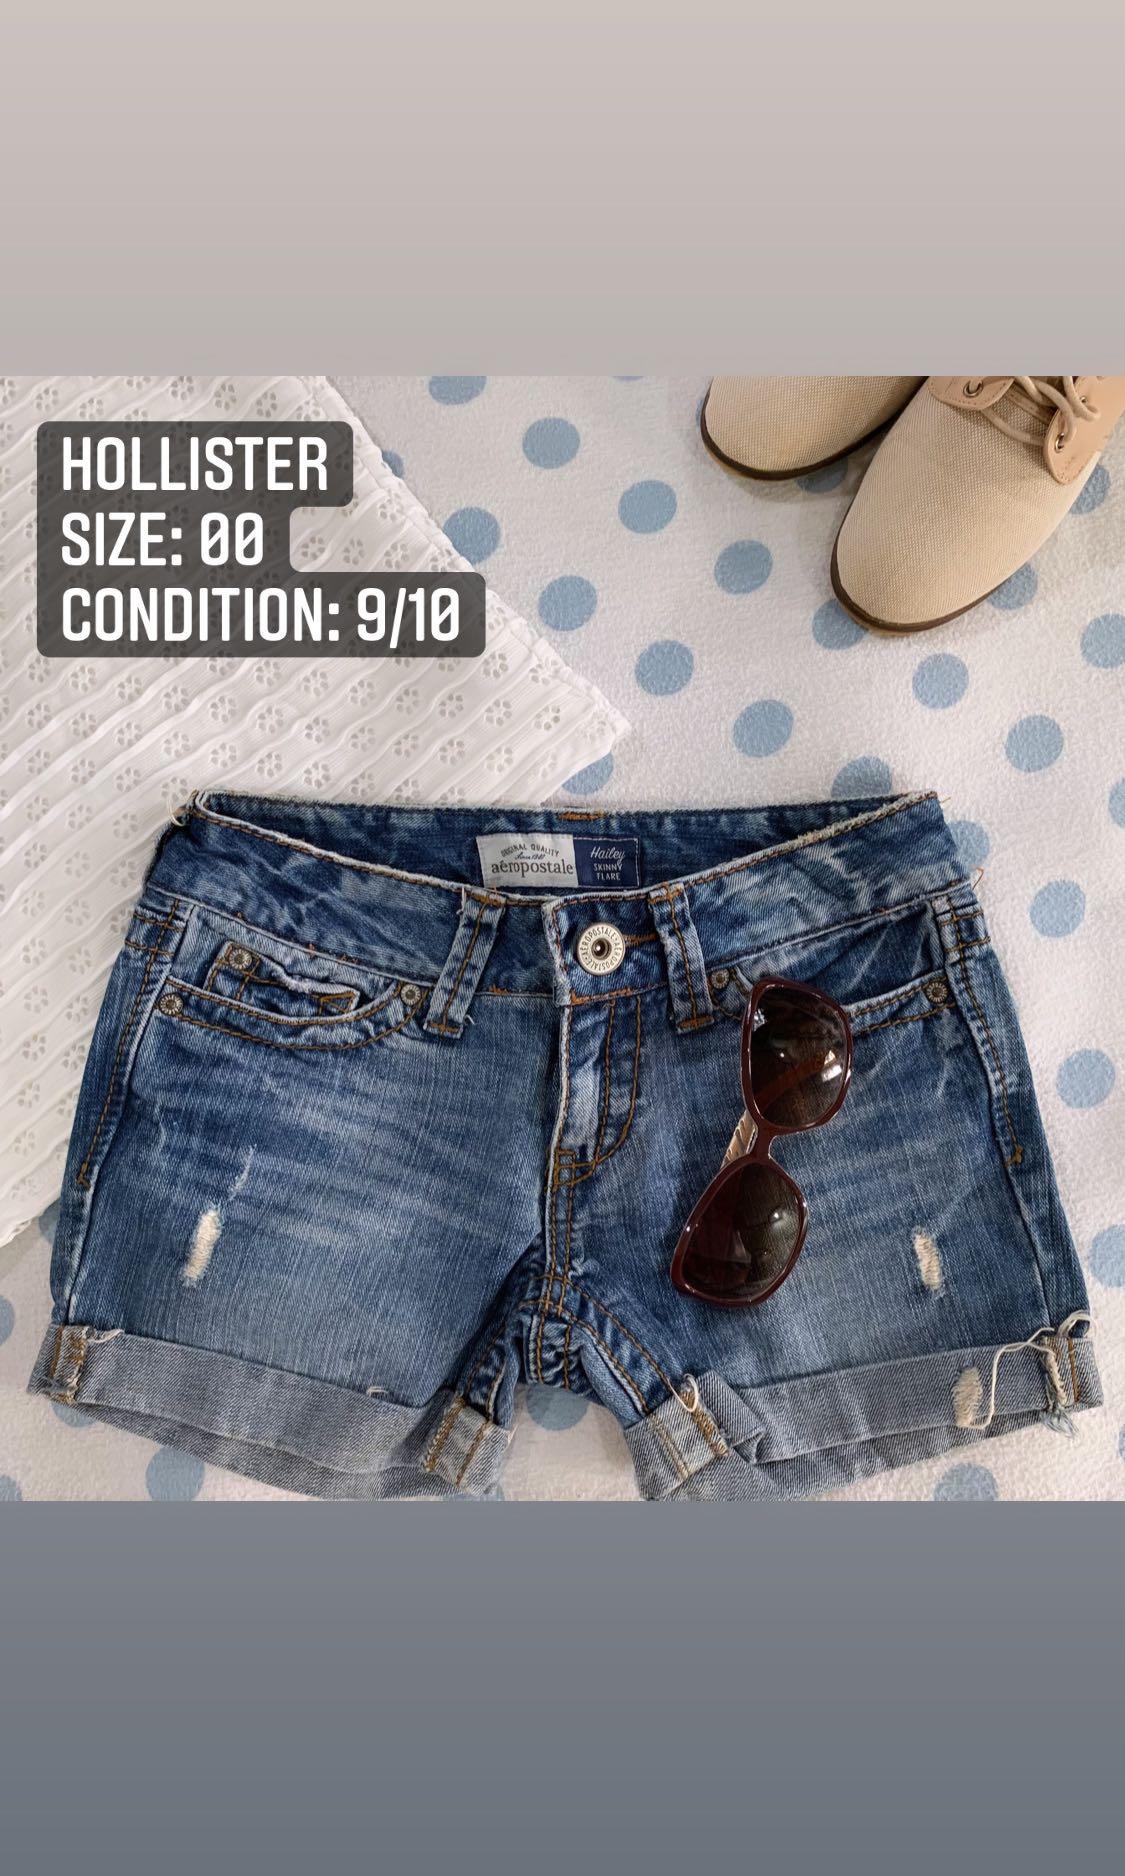 size 10 in hollister jeans